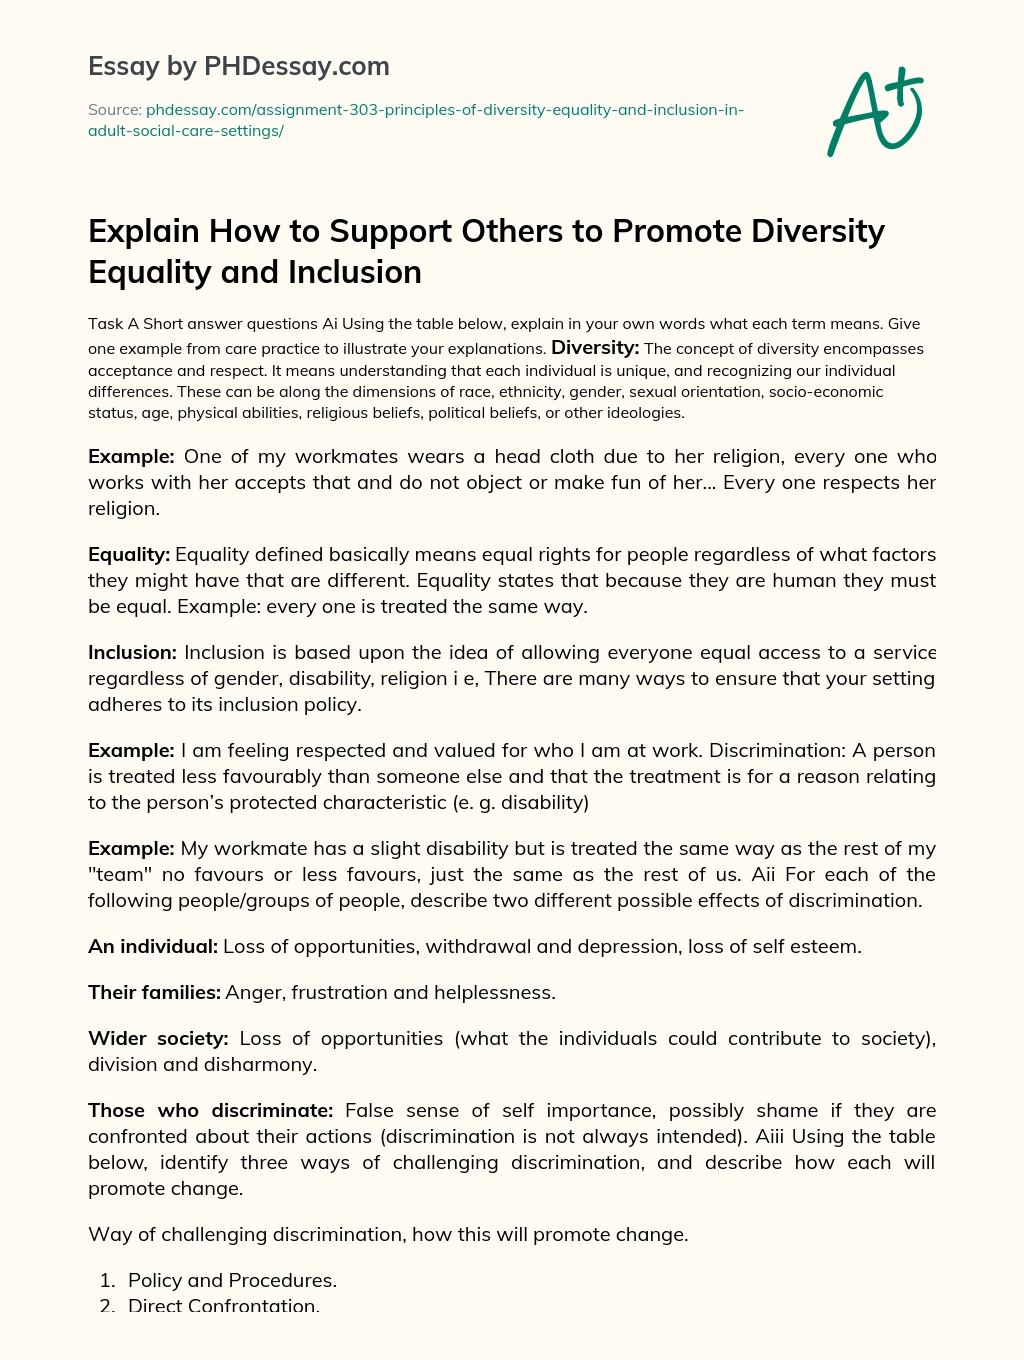 Explain How to Support Others to Promote Diversity Equality and Inclusion essay